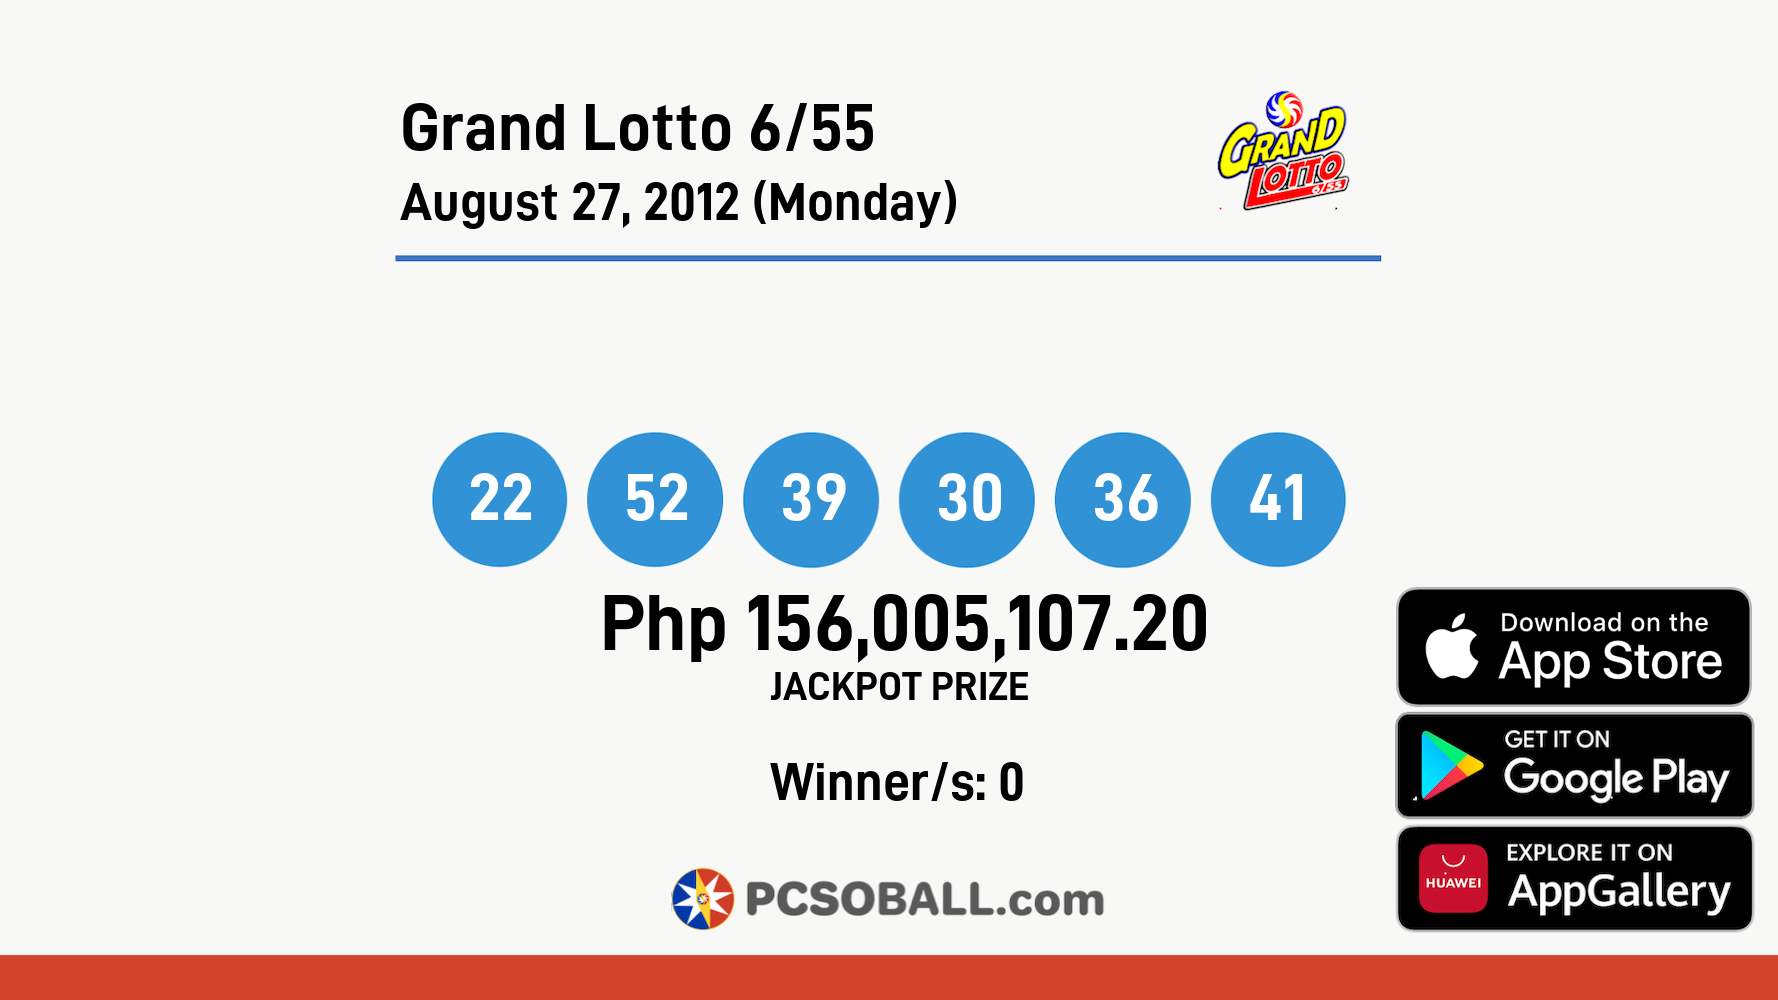 Grand Lotto 6/55 August 27, 2012 (Monday) Result